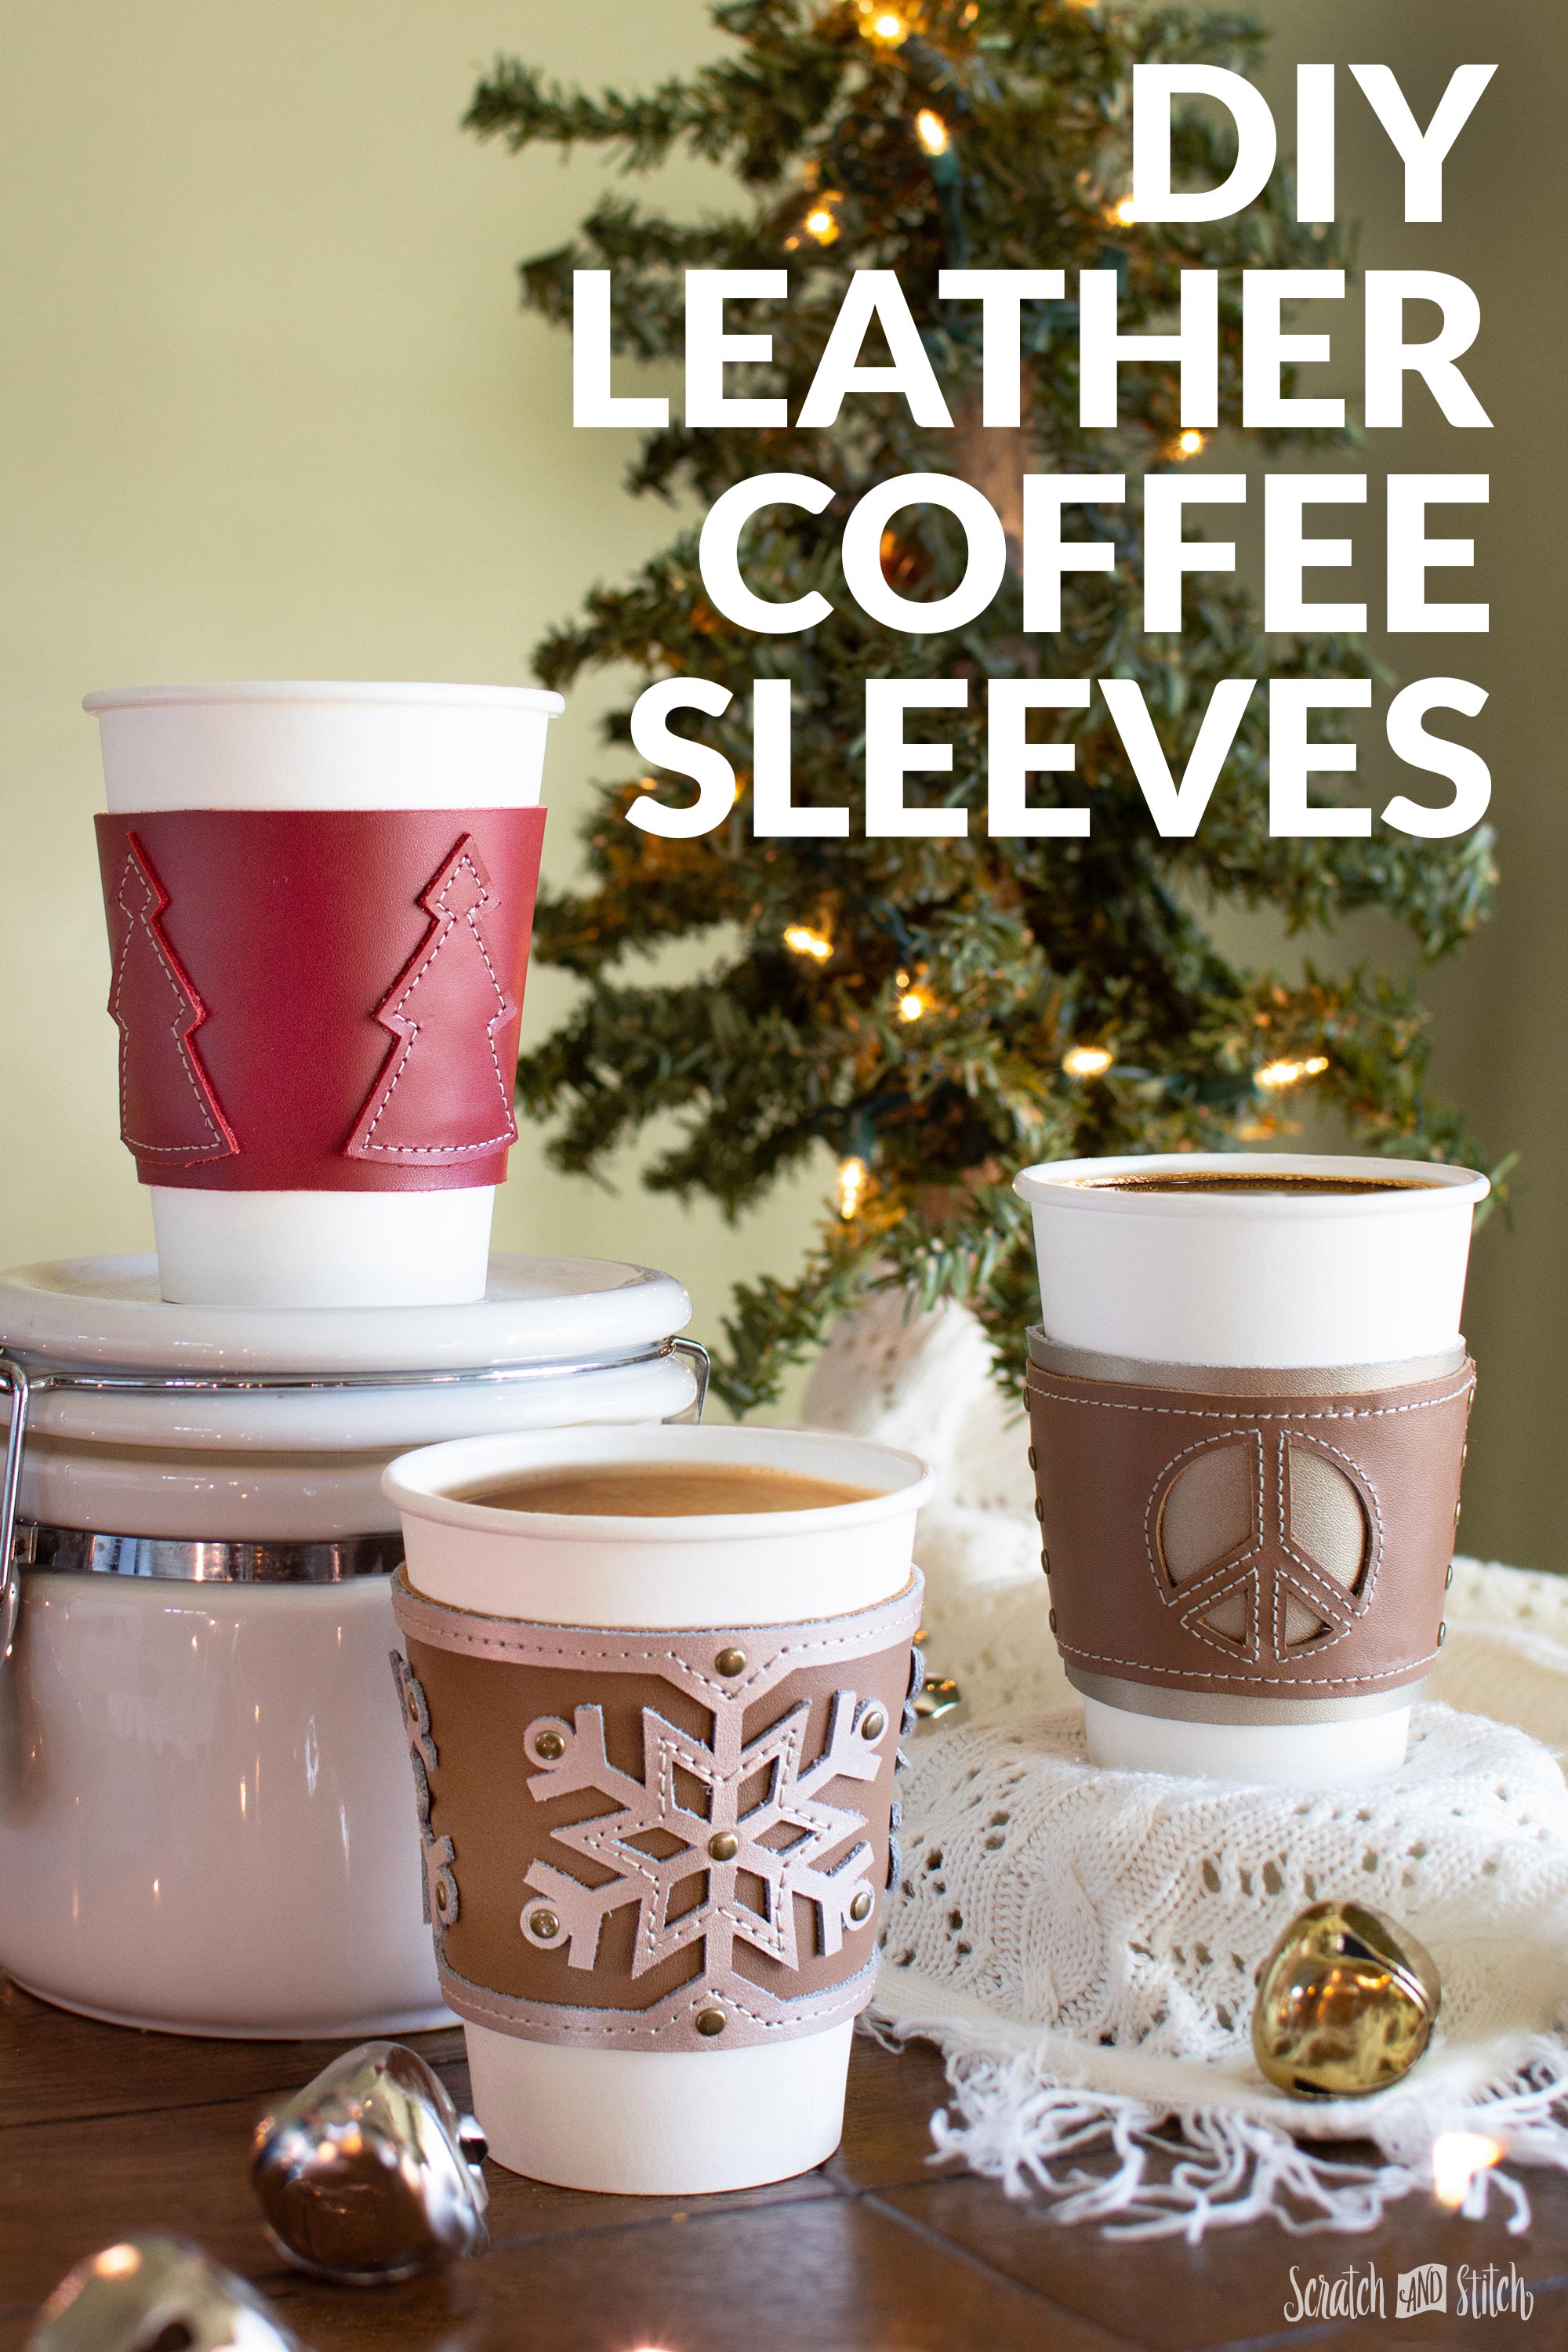 How to Make A Leather Coffee Cup Holder - 3 Ways with Free Pattern and ...